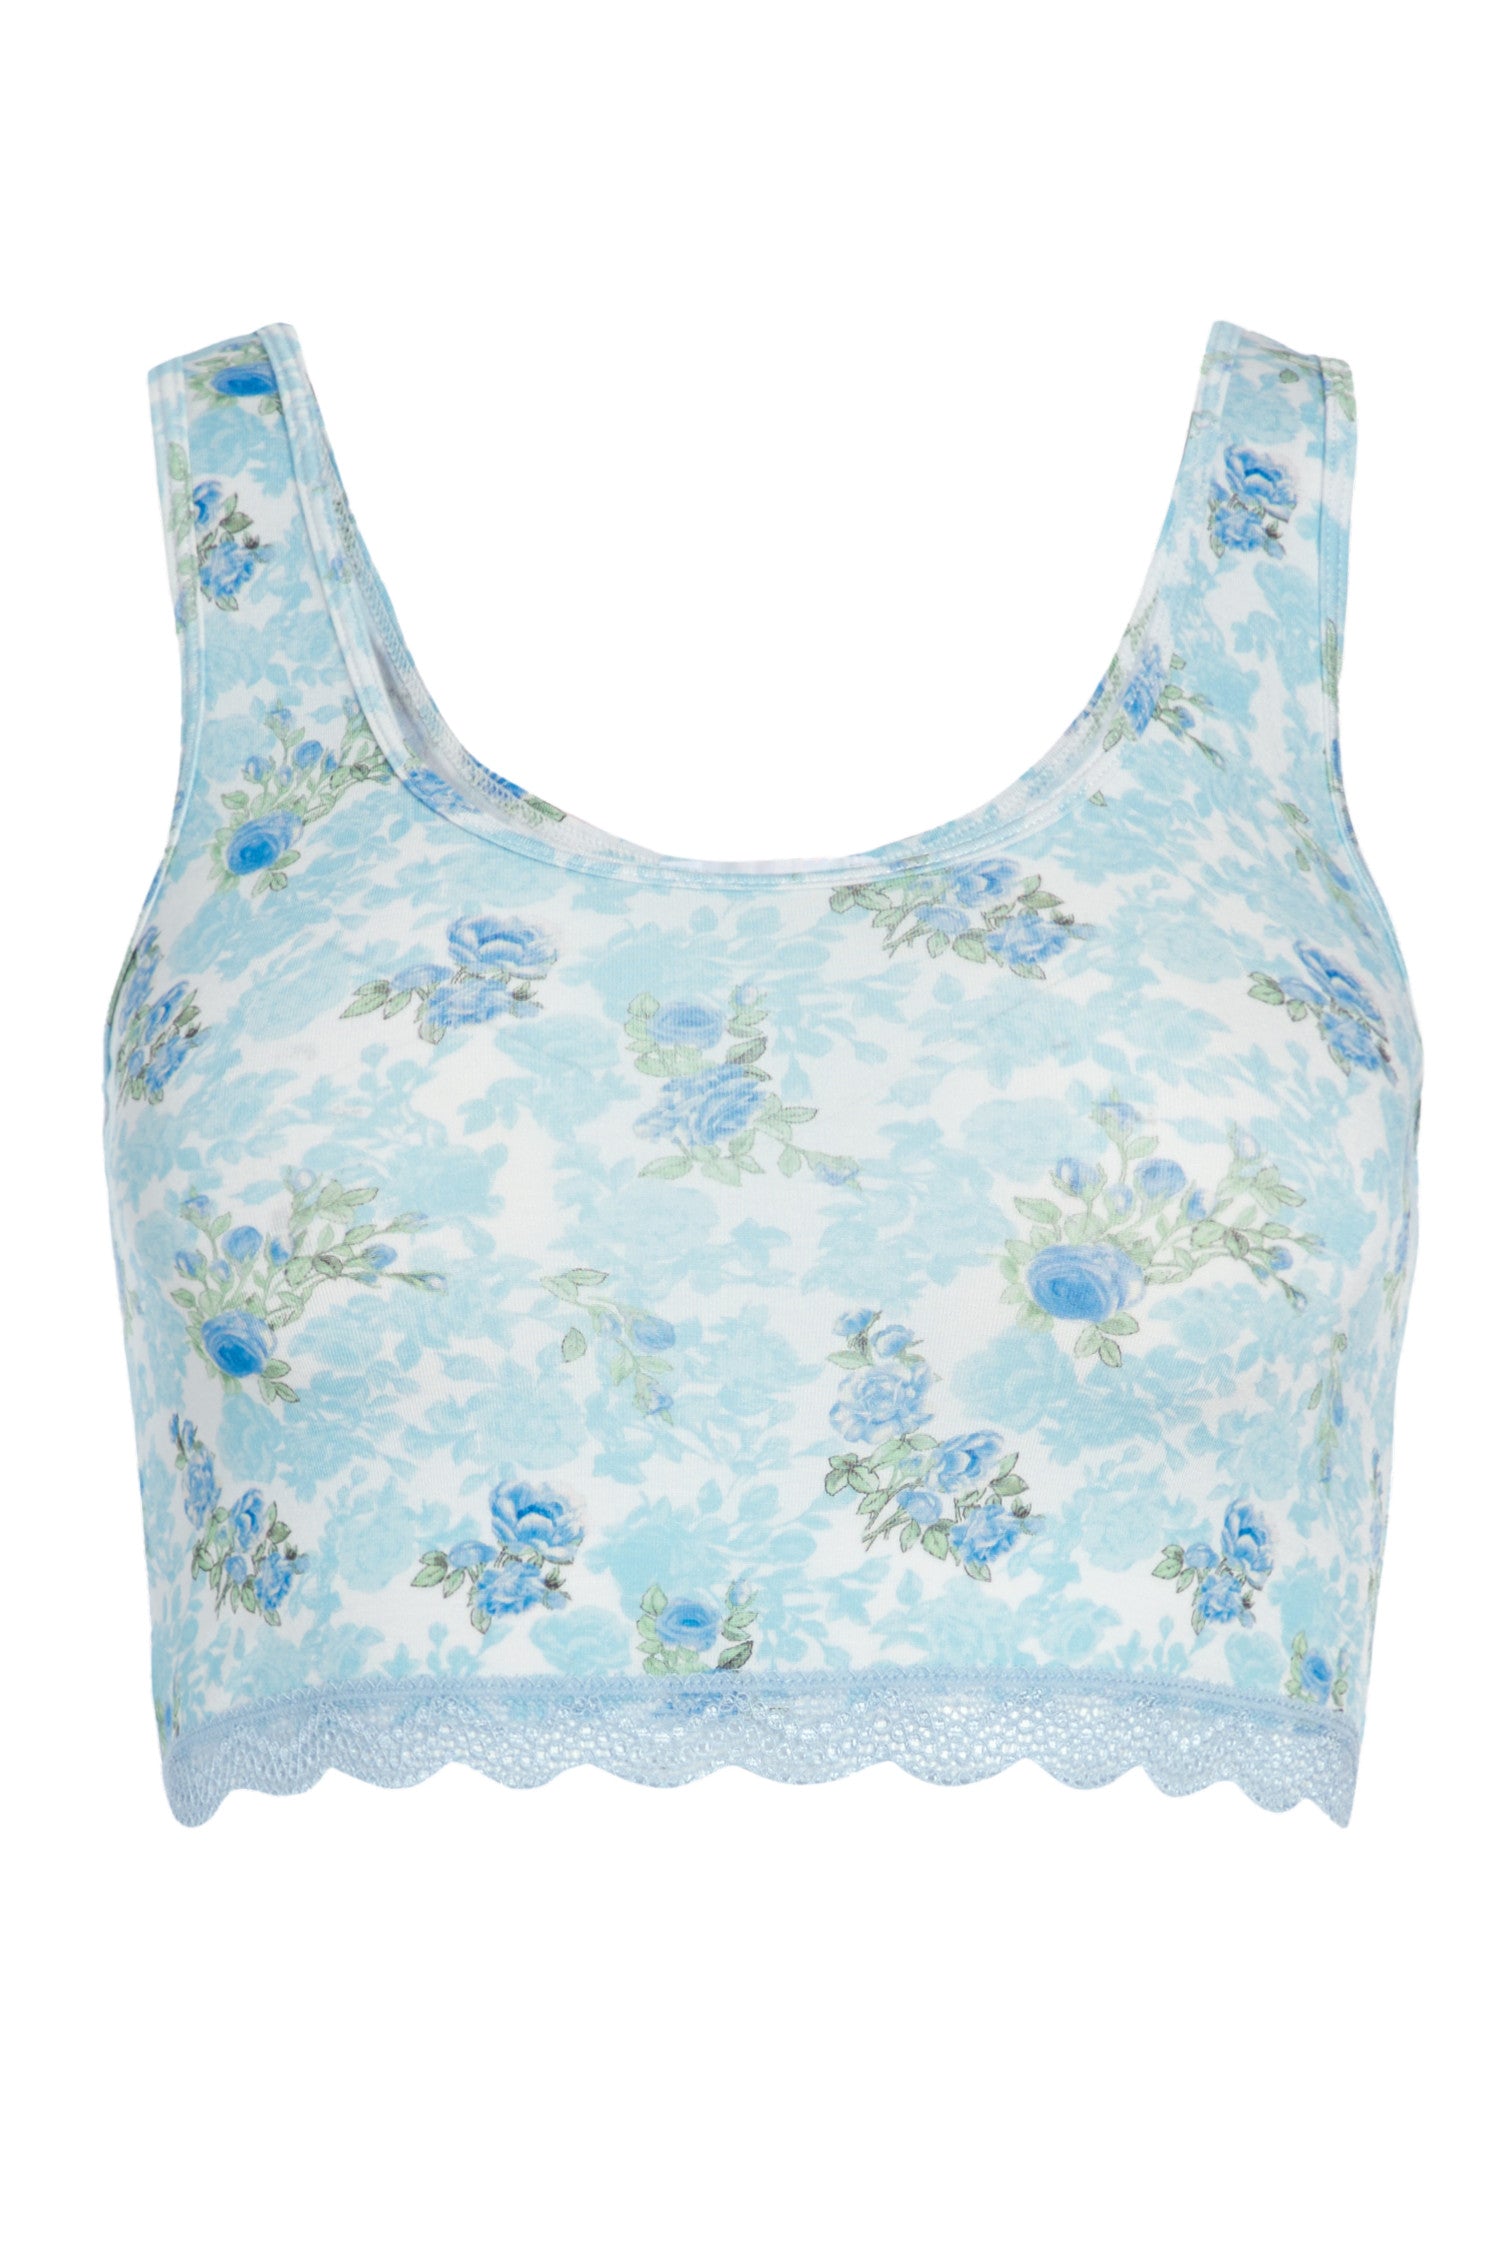 Blue floral print bralette and short loungwear set in soft cotton.